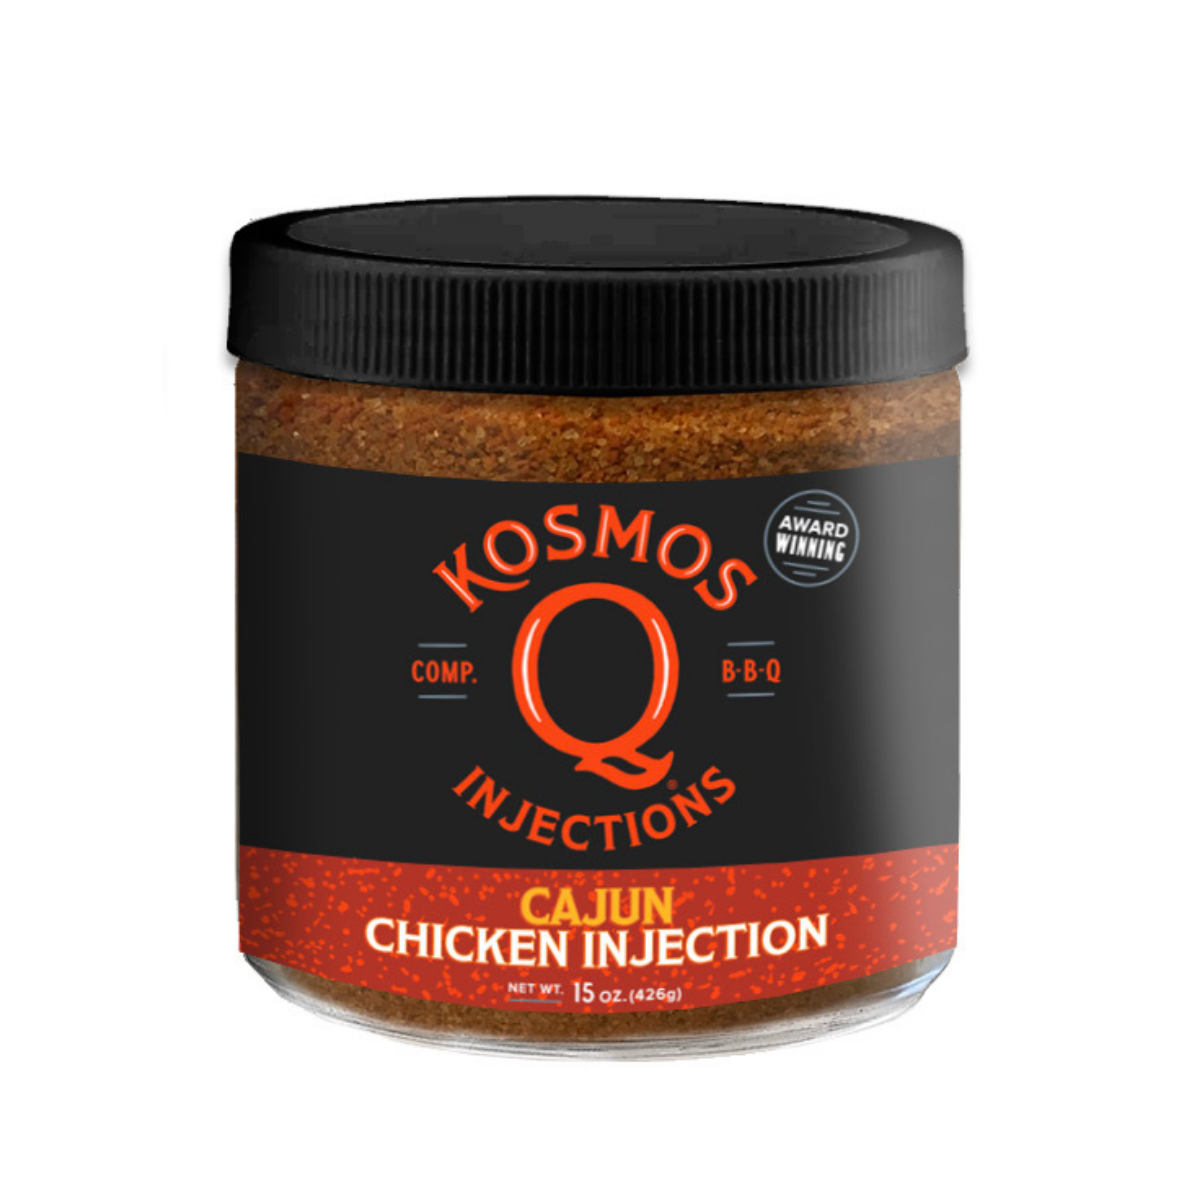 Kosmo's Q BBQ Injections Cajun Chicken Injection